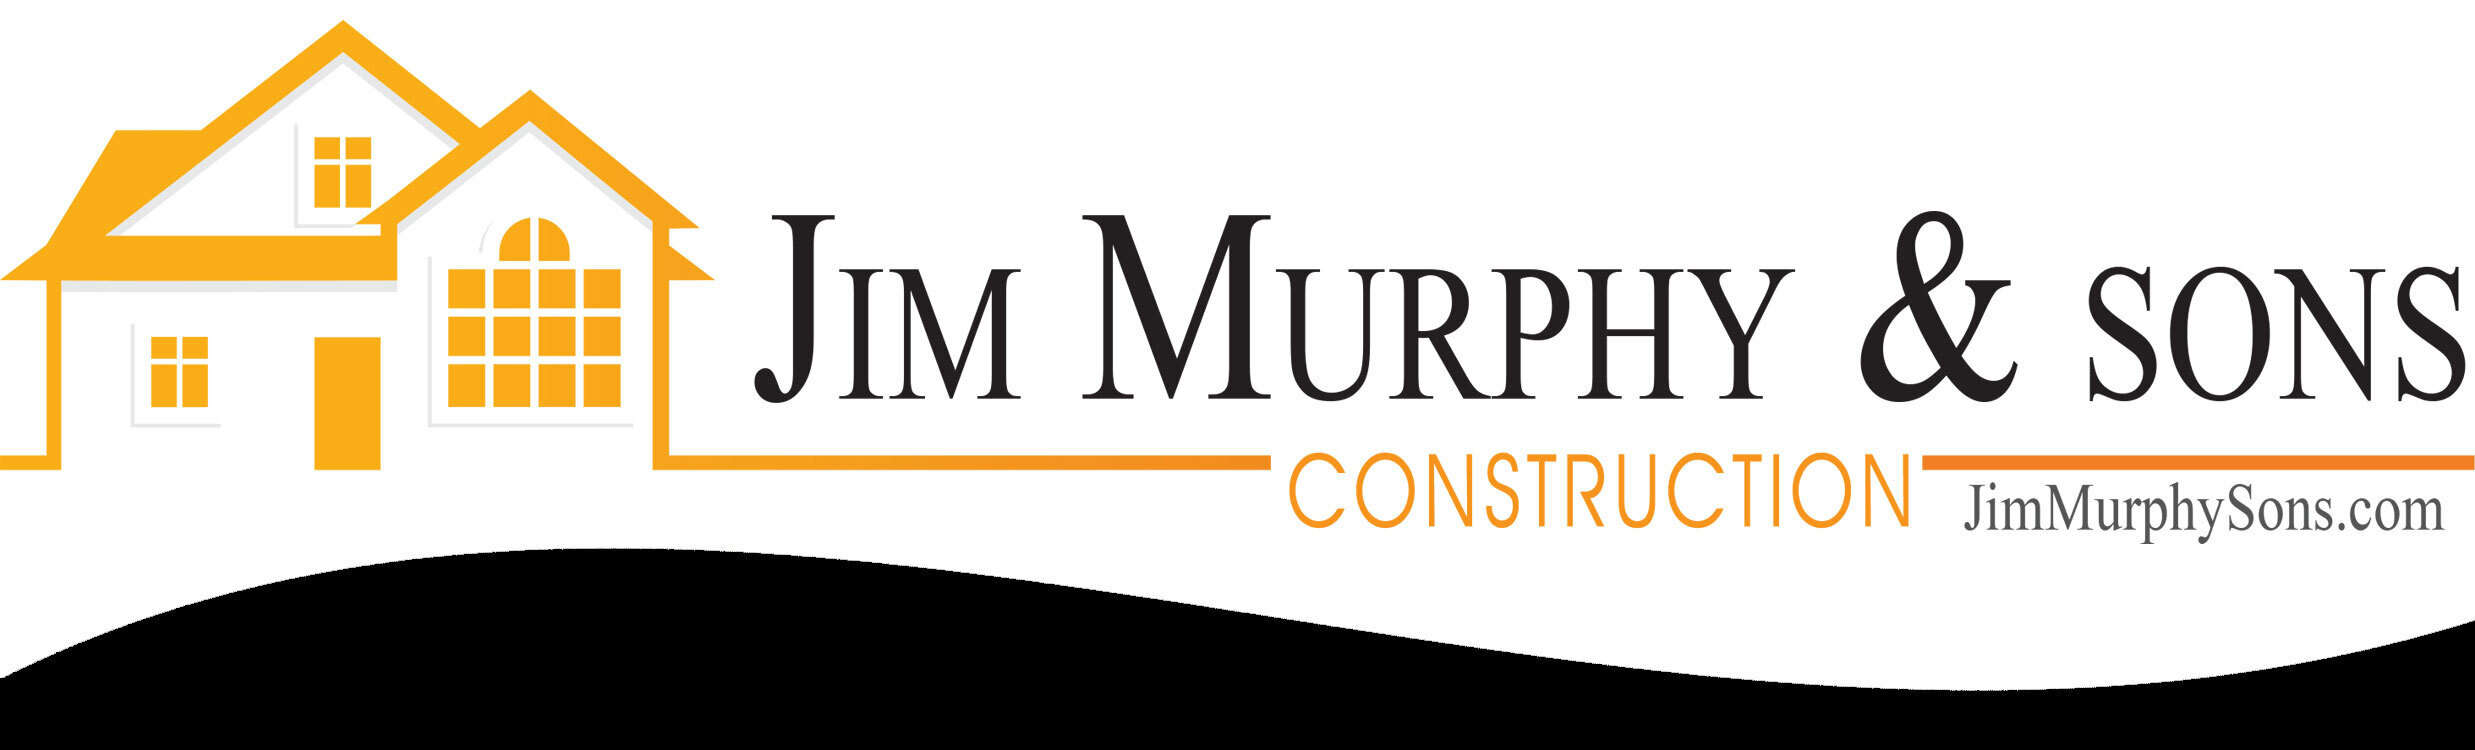 Jim Murphy and Sons Construction Co. Logo